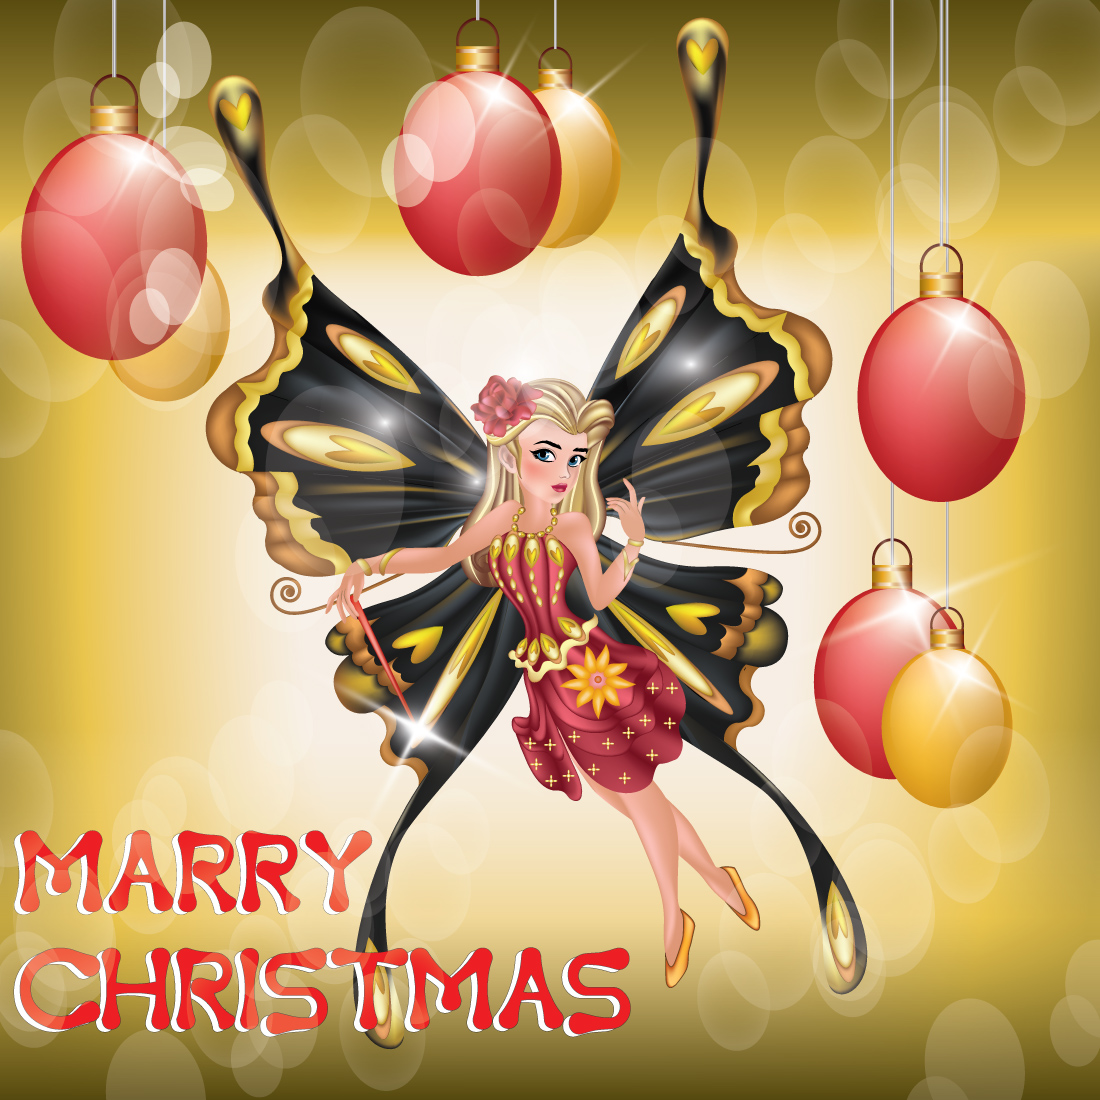 Portrait-of-a-butterfly-barbie-wearing-a-fairy-costume-and-holding-a-magic-wand-for-christmass preview image.